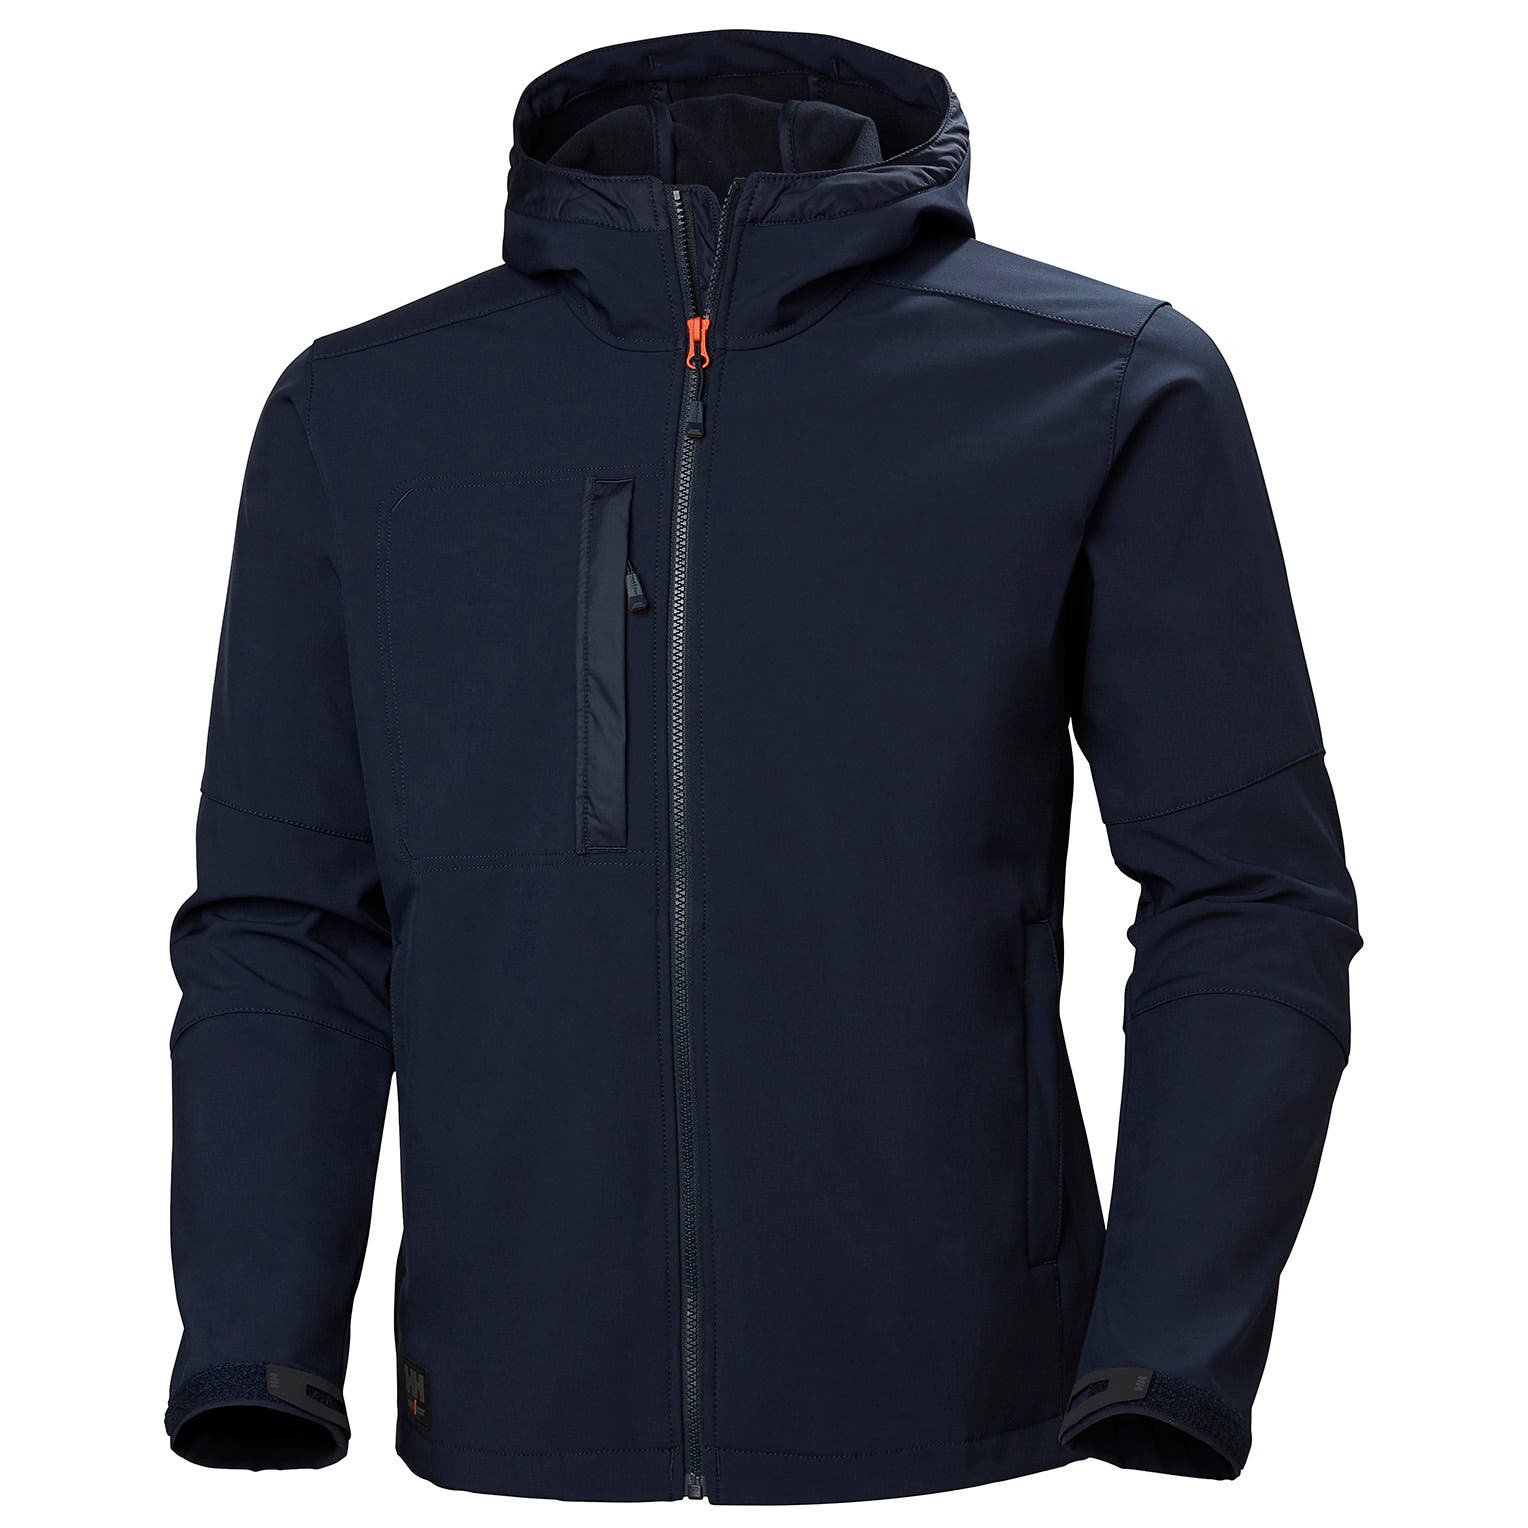 Helly Hansen Men's Kensington Hooded Softshell Jacket in Navy from the front